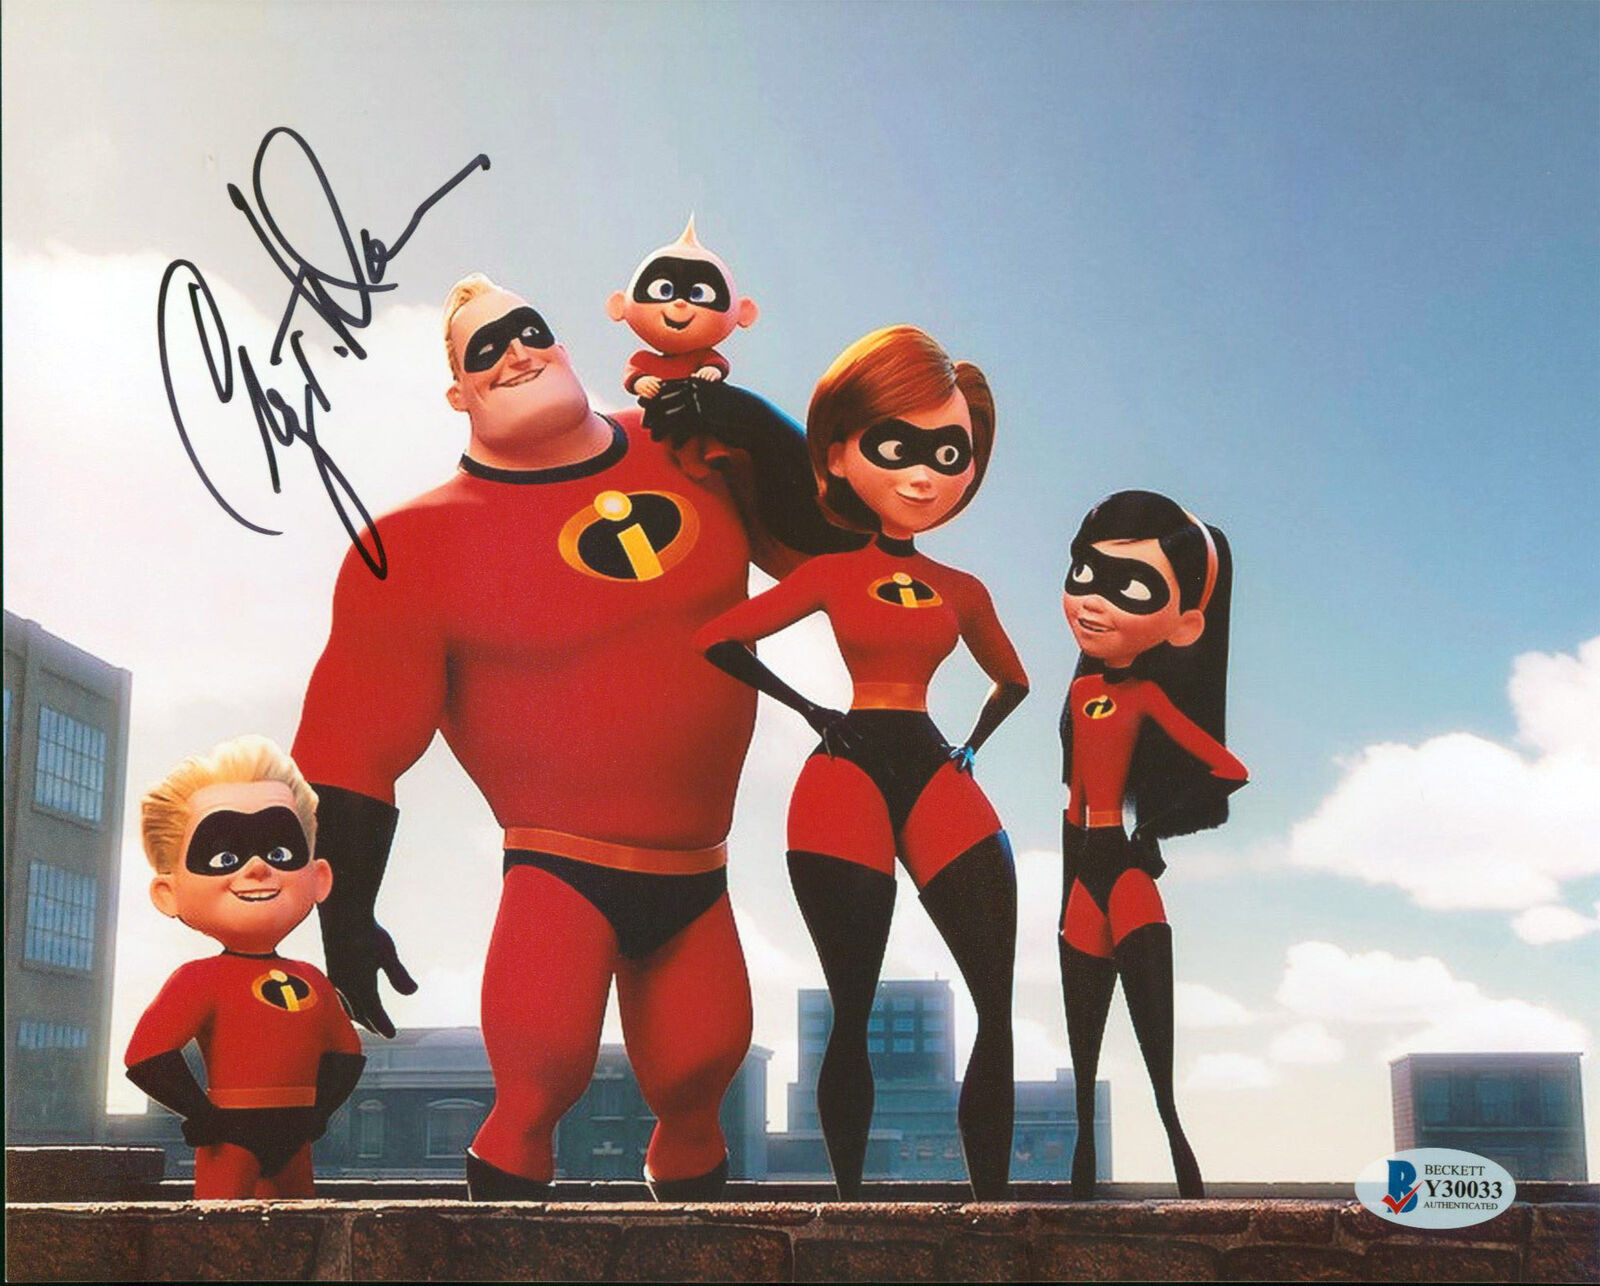 Craig T. Nelson The Incredibles 2 Authentic Signed 8x10 Photo Poster painting BAS #Y30033